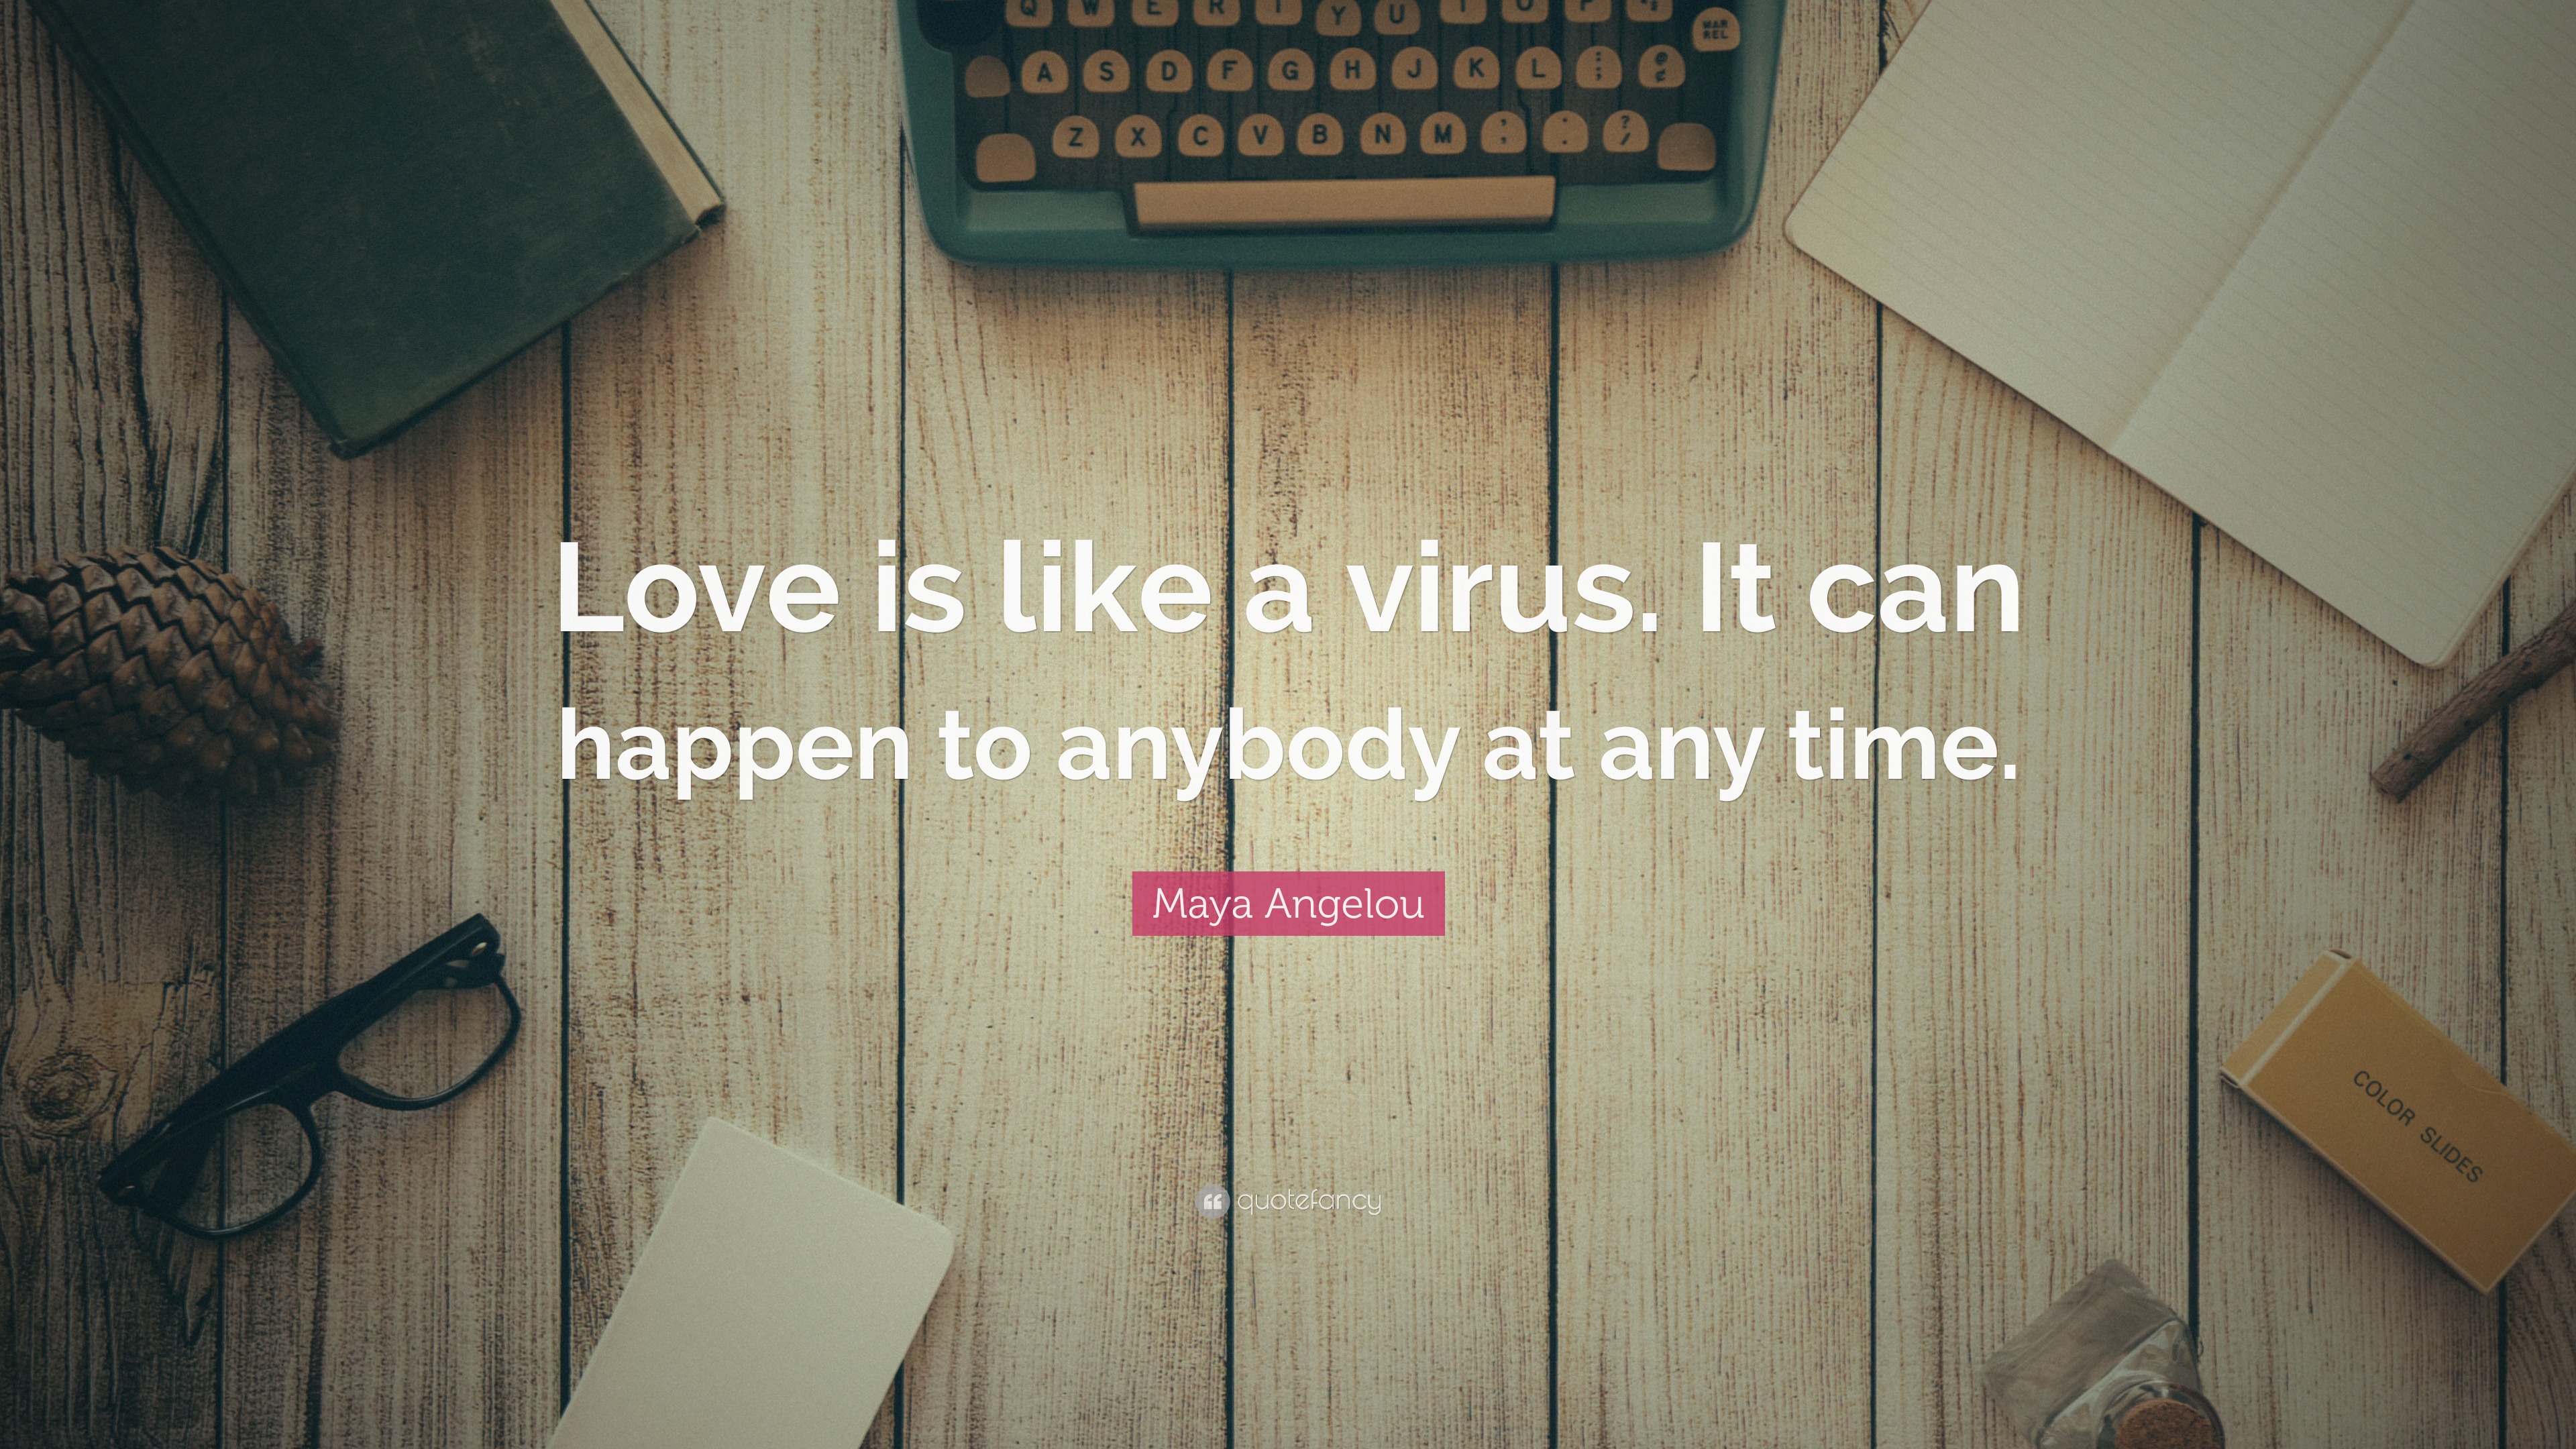 Maya Angelou Quote “Love is like a virus It can happen to anybody